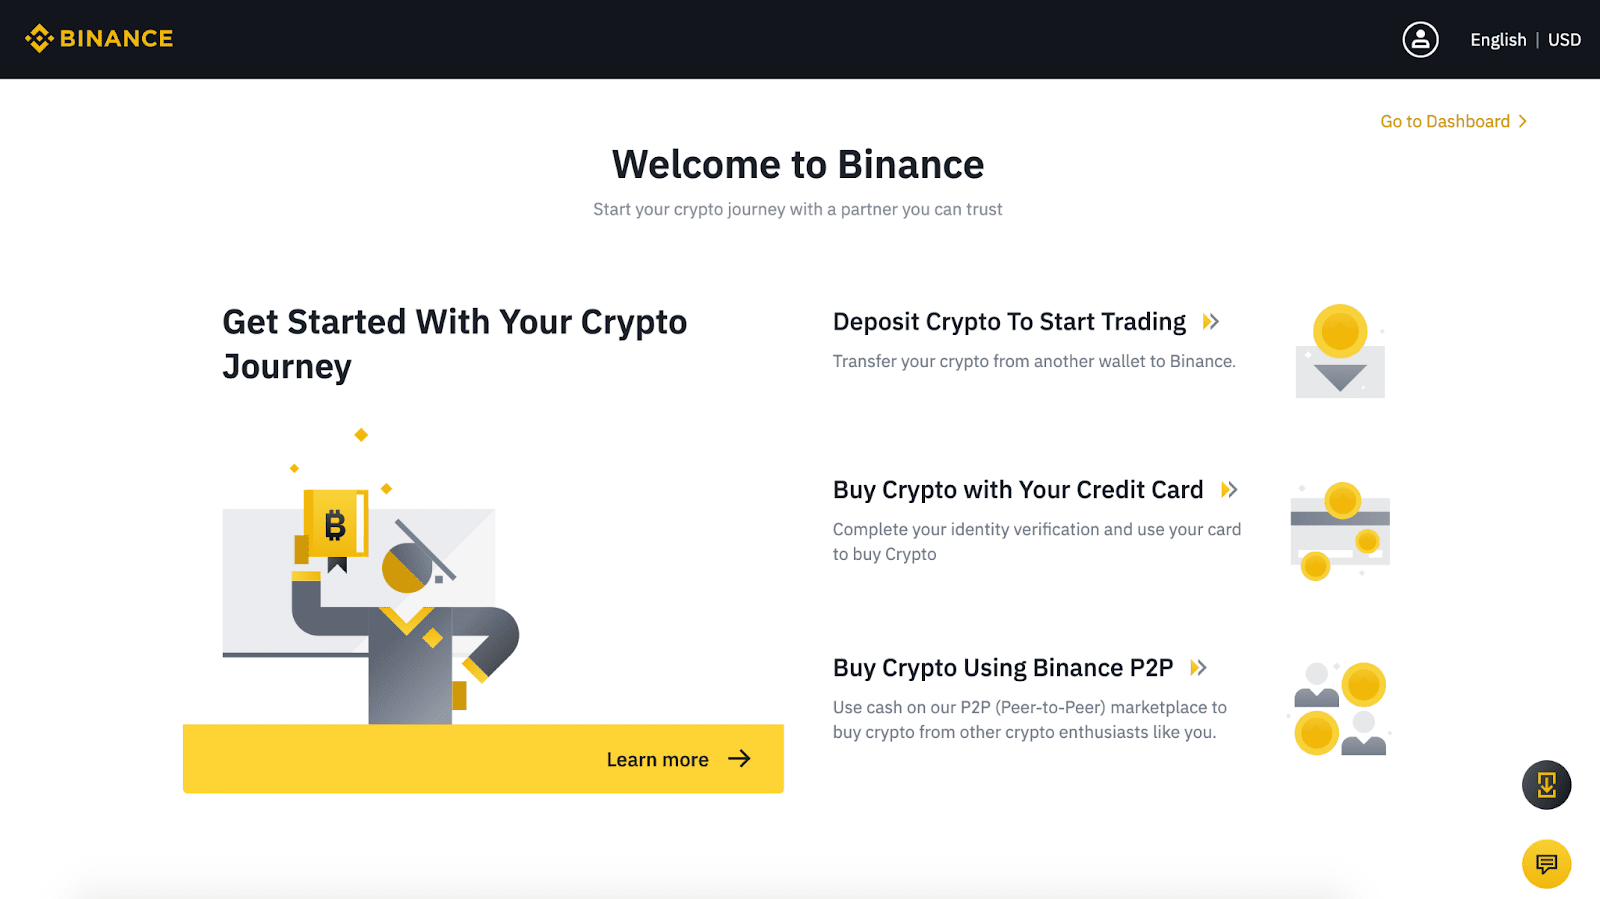 How to Buy Cryptocurrency: A Quick Guide from Binance